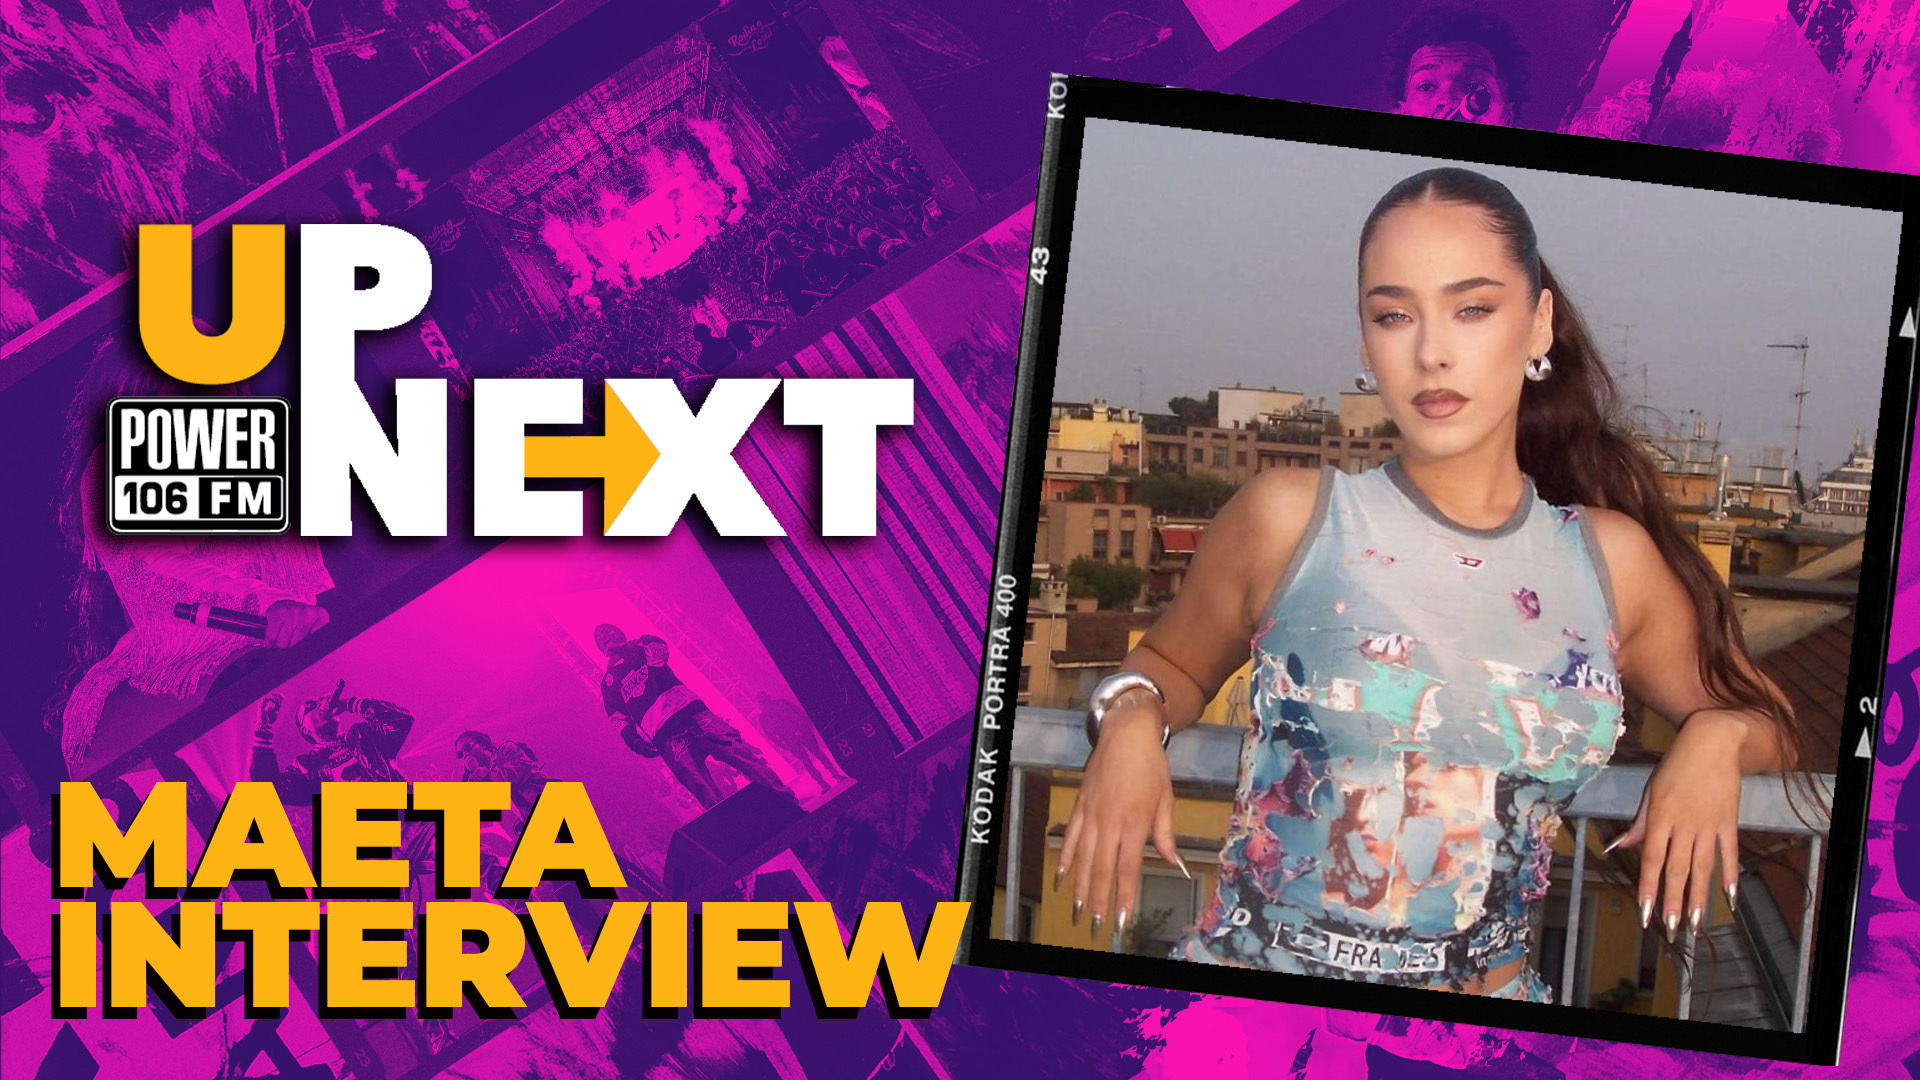 Up Next With Maeta – Tour With Chris Brown, Unreleased Music W/ Pharrell, Music W/ Kaytranada + More